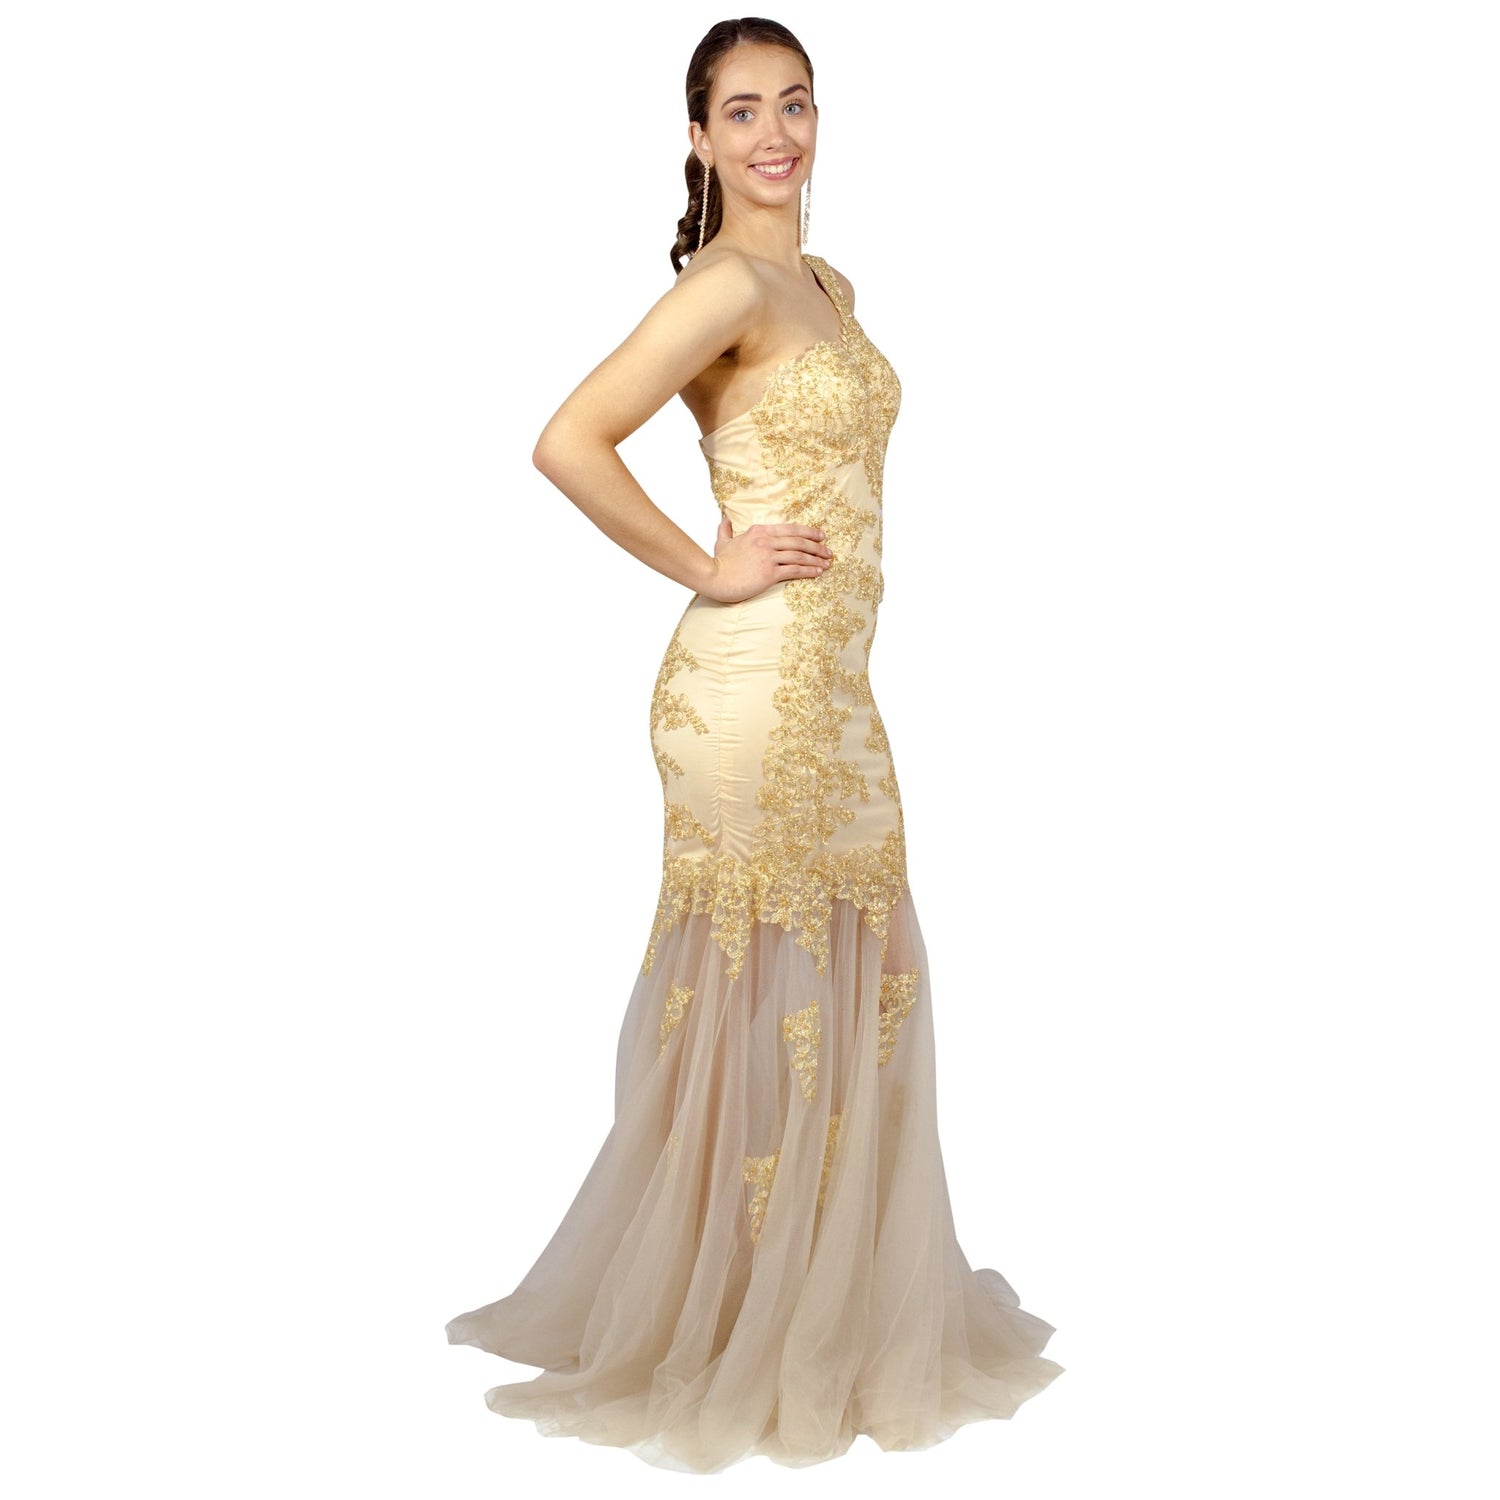 OTTILIA | One Shoulder Beaded Gold Fishtail Formal Dress - All Products Envious Bridal